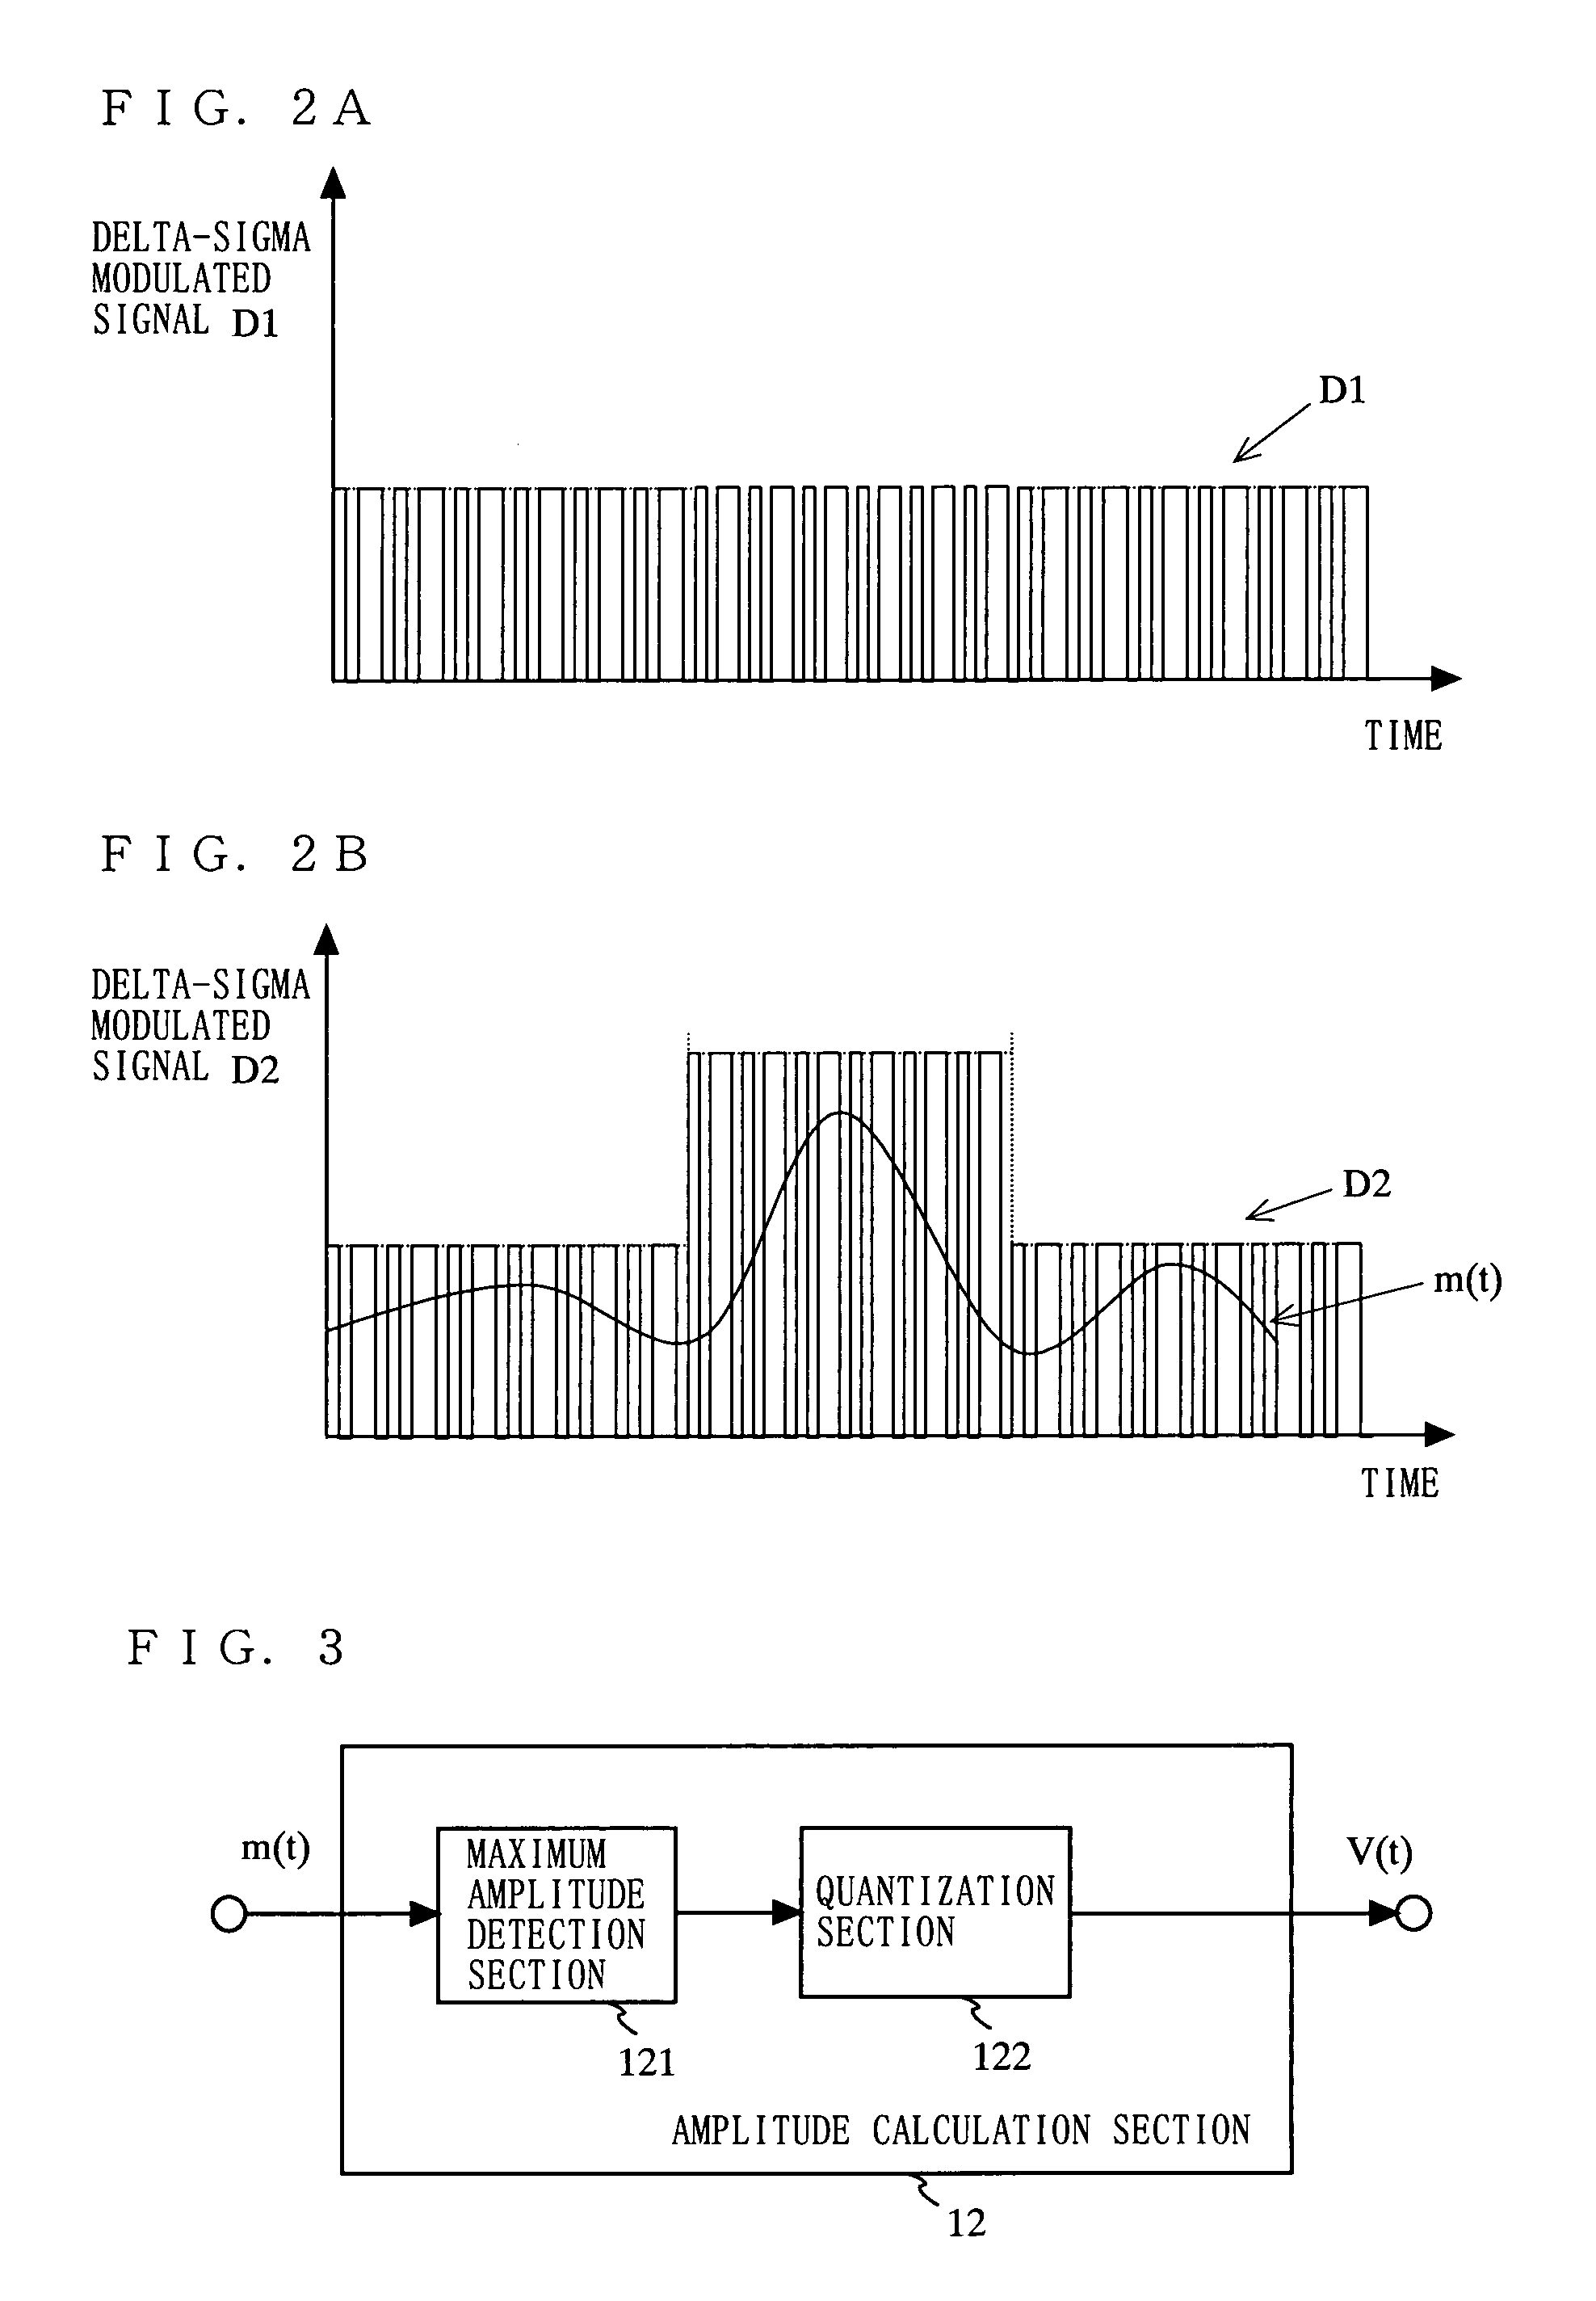 Transmission circuit and communication device